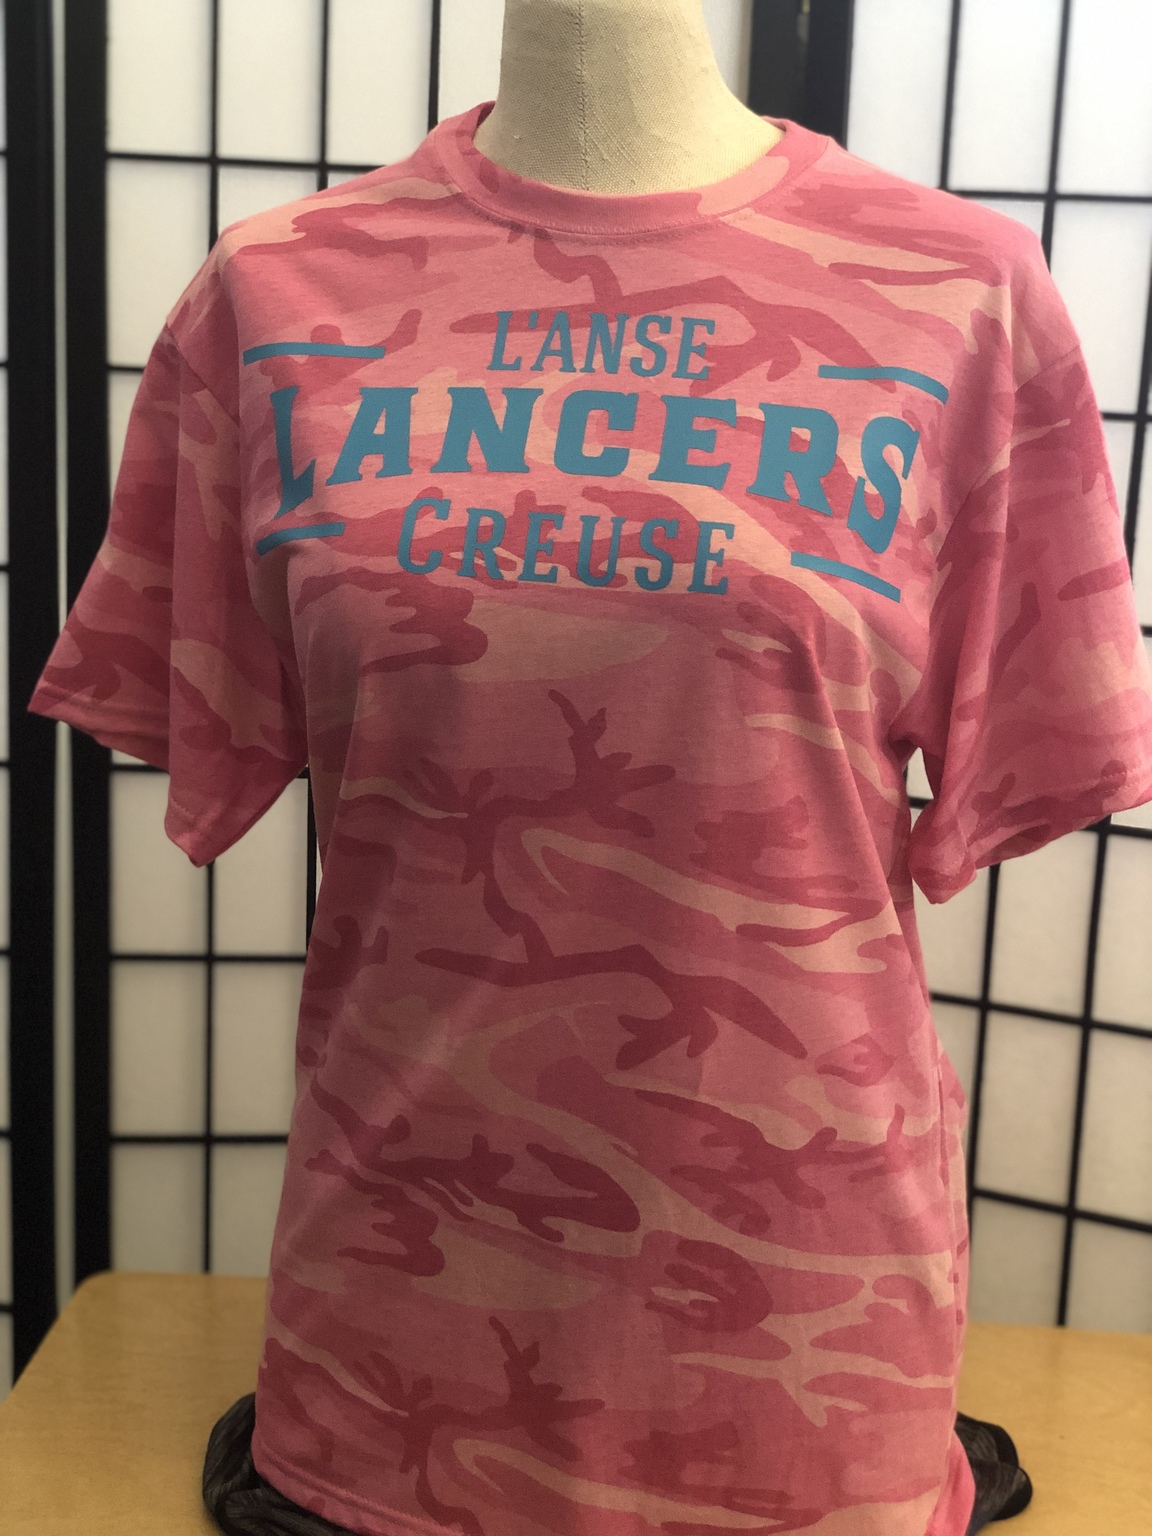 L'Anse Lancers Creuse blue with lines